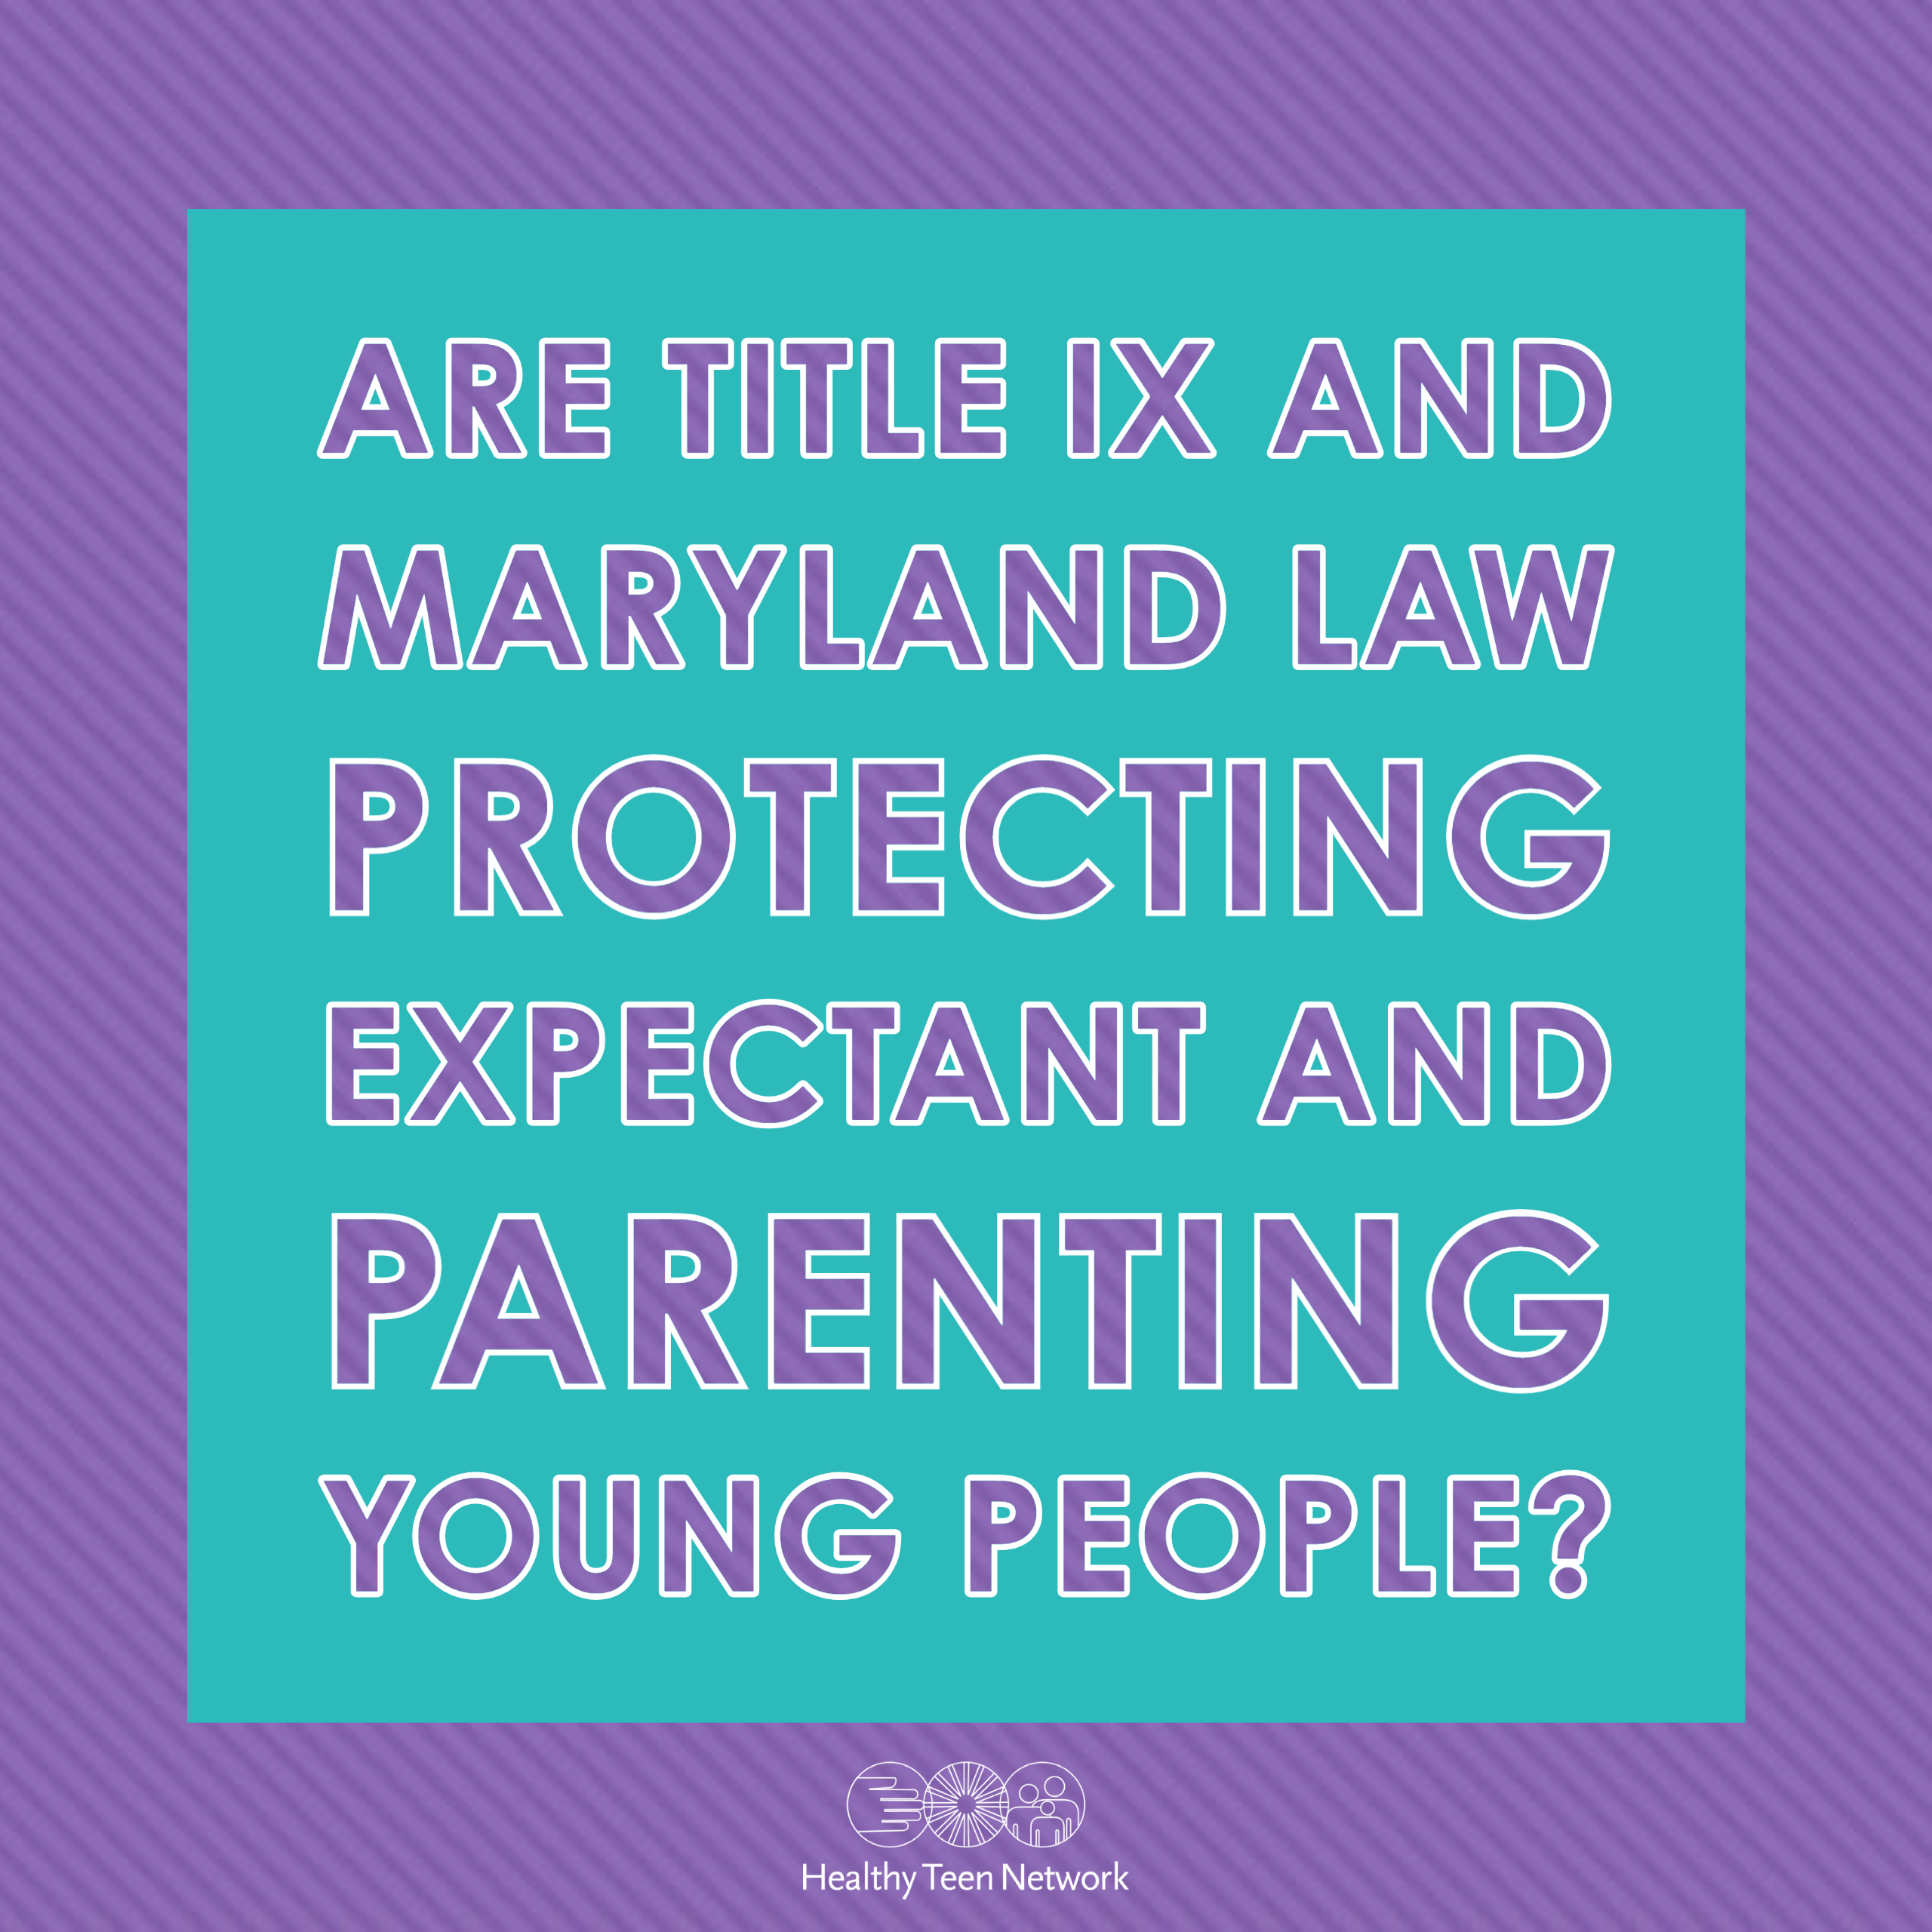 Are Title IX and Maryland Law Protecting Expectant and Parenting Young People?